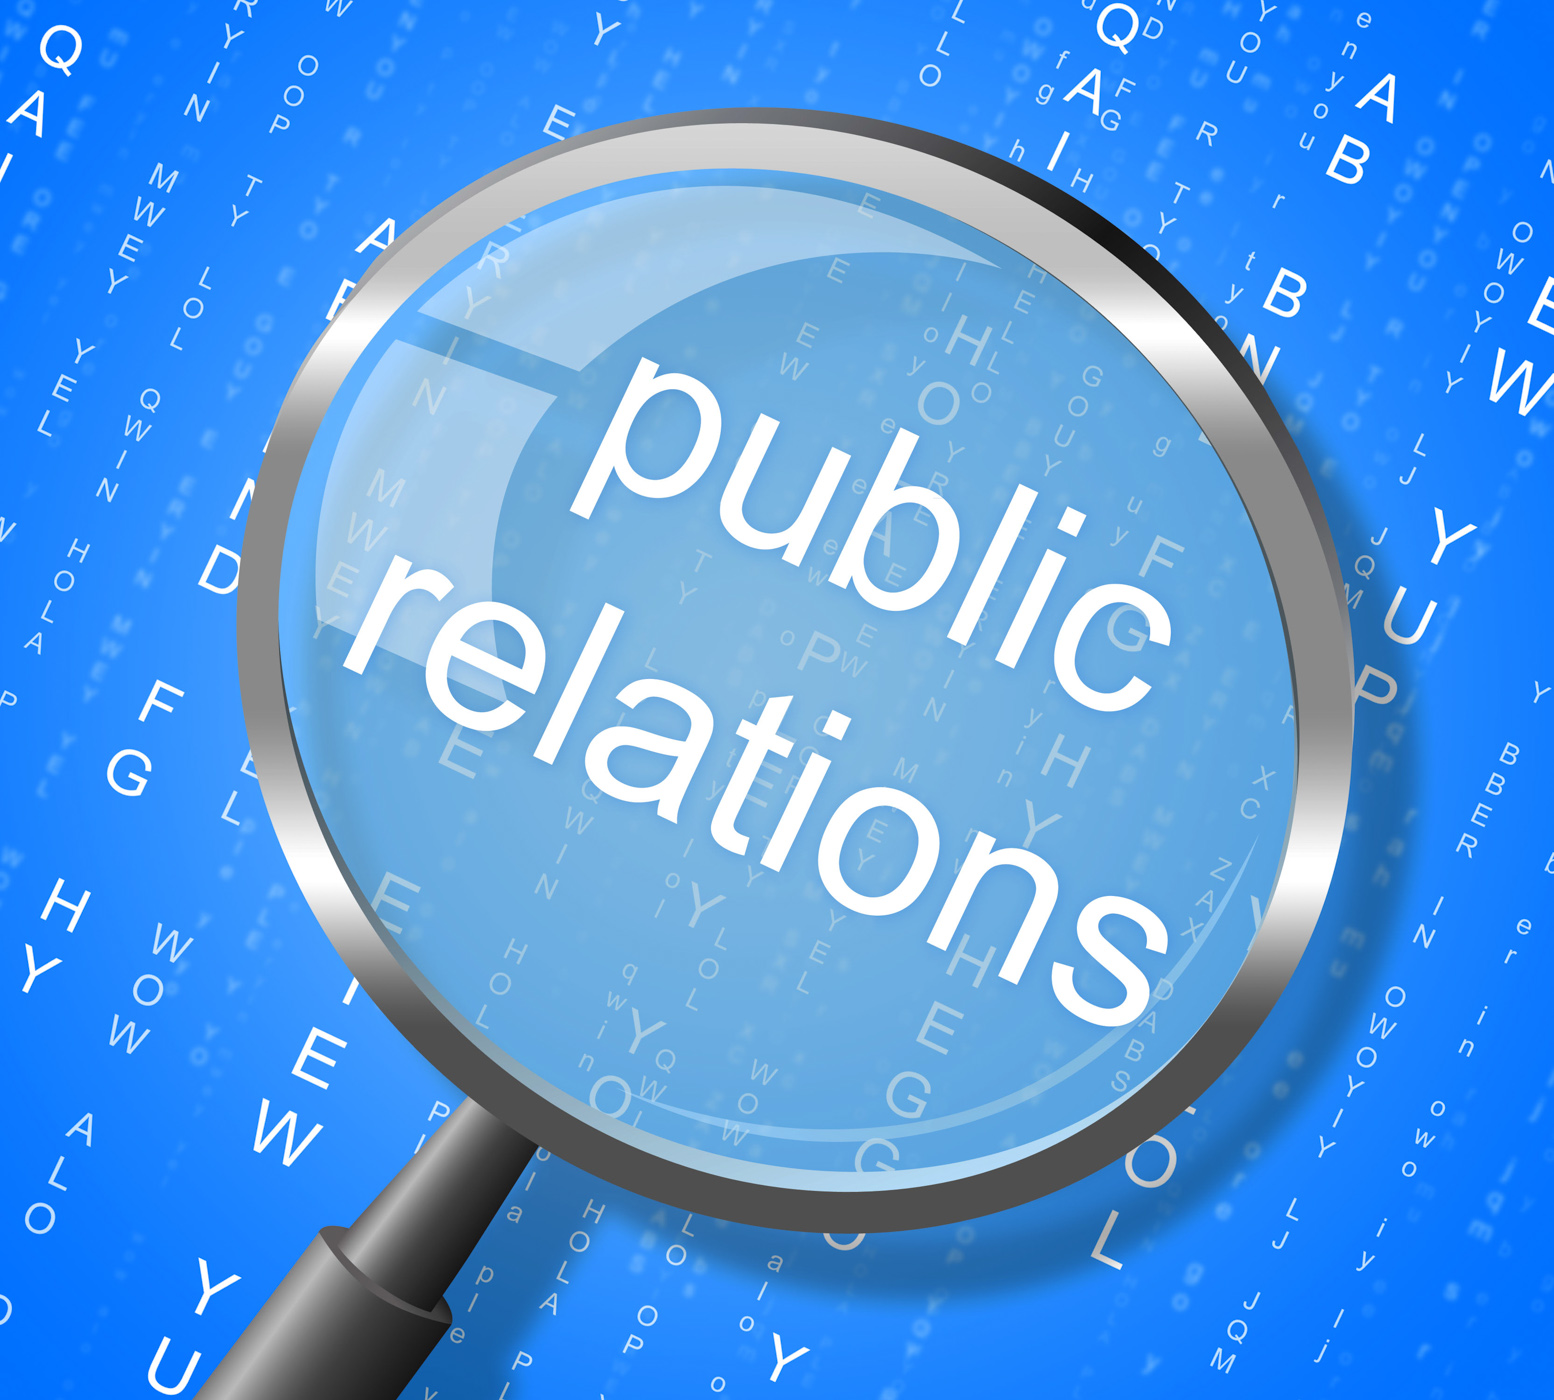 Public relations means press release and magnification photo